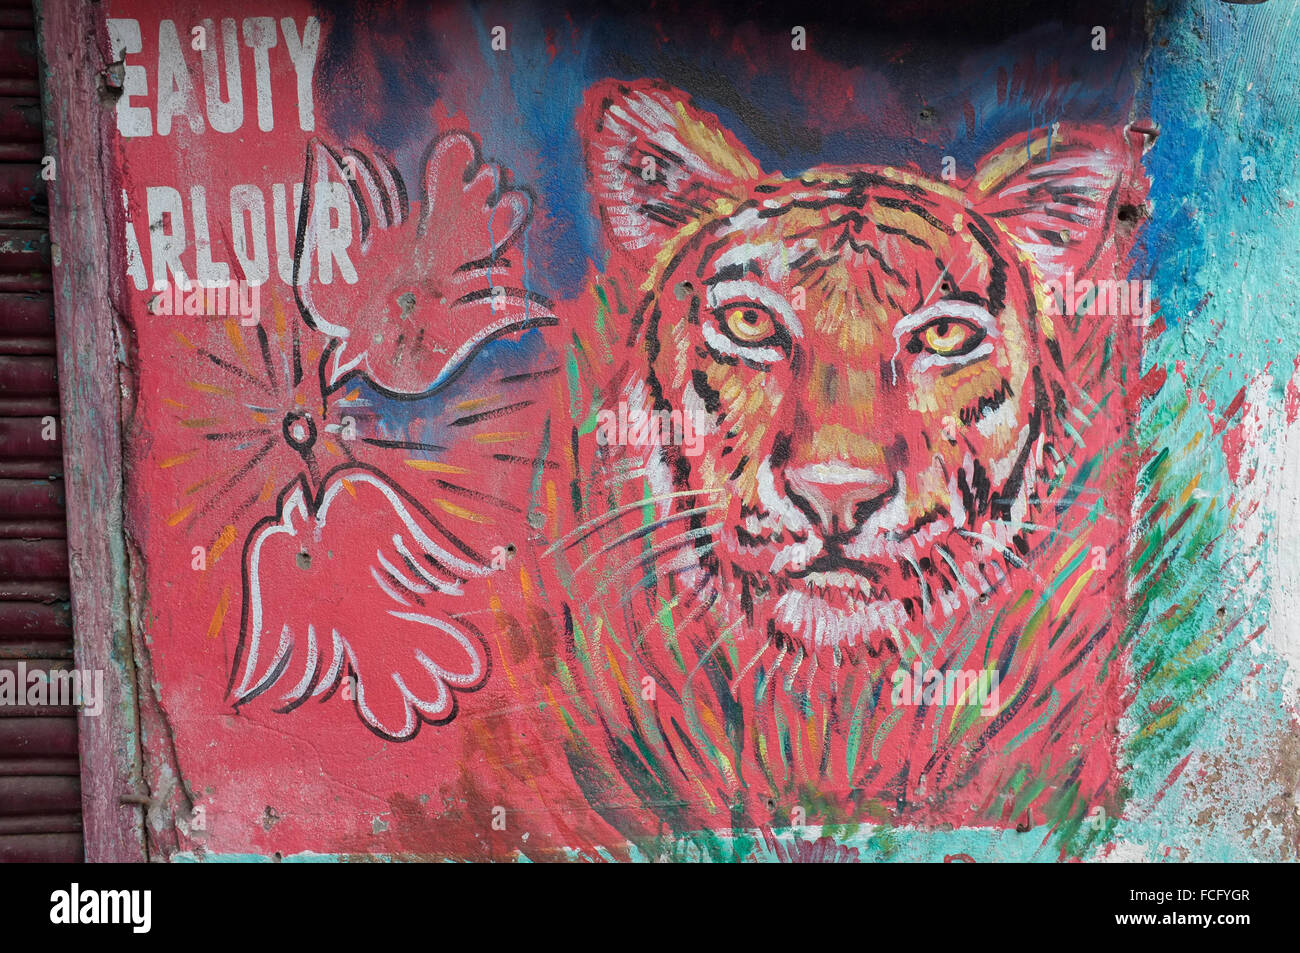 A wall painting of a tiger advertising a beauty parlor. Kolkata (Calcutta), West Bengal, India. Stock Photo